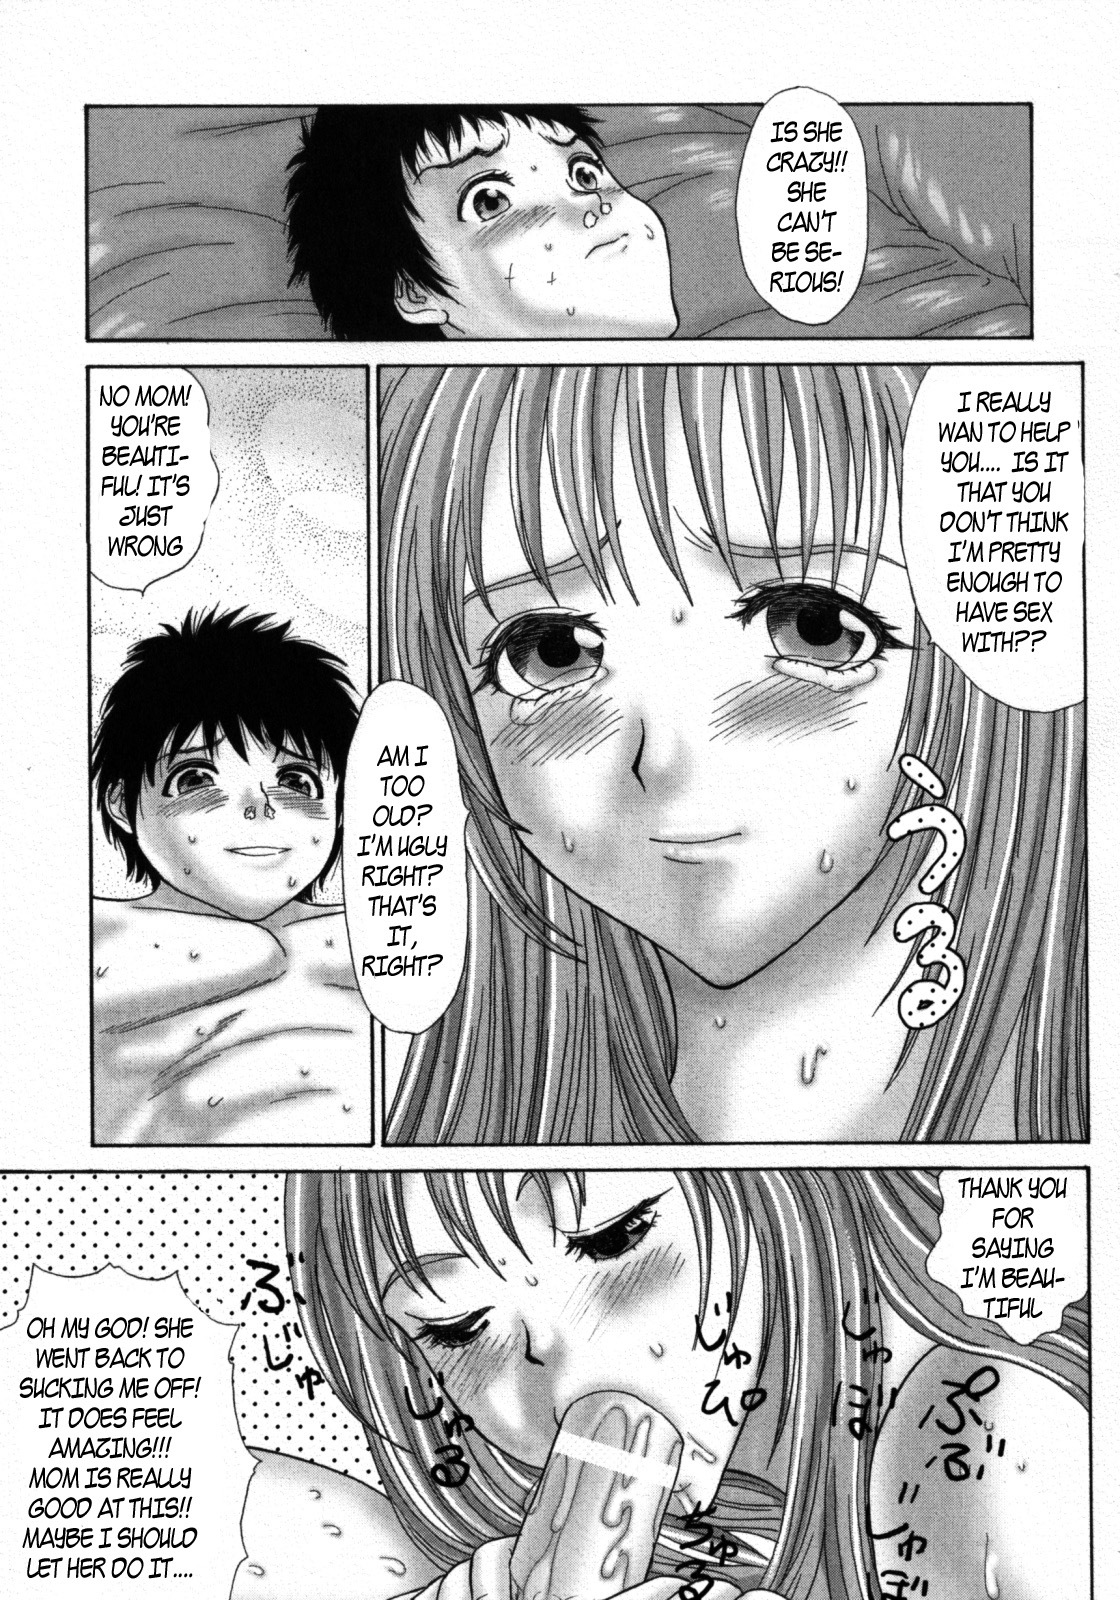 Concerned Mother [English] [Rewrite] [EZ Rewriter] page 7 full